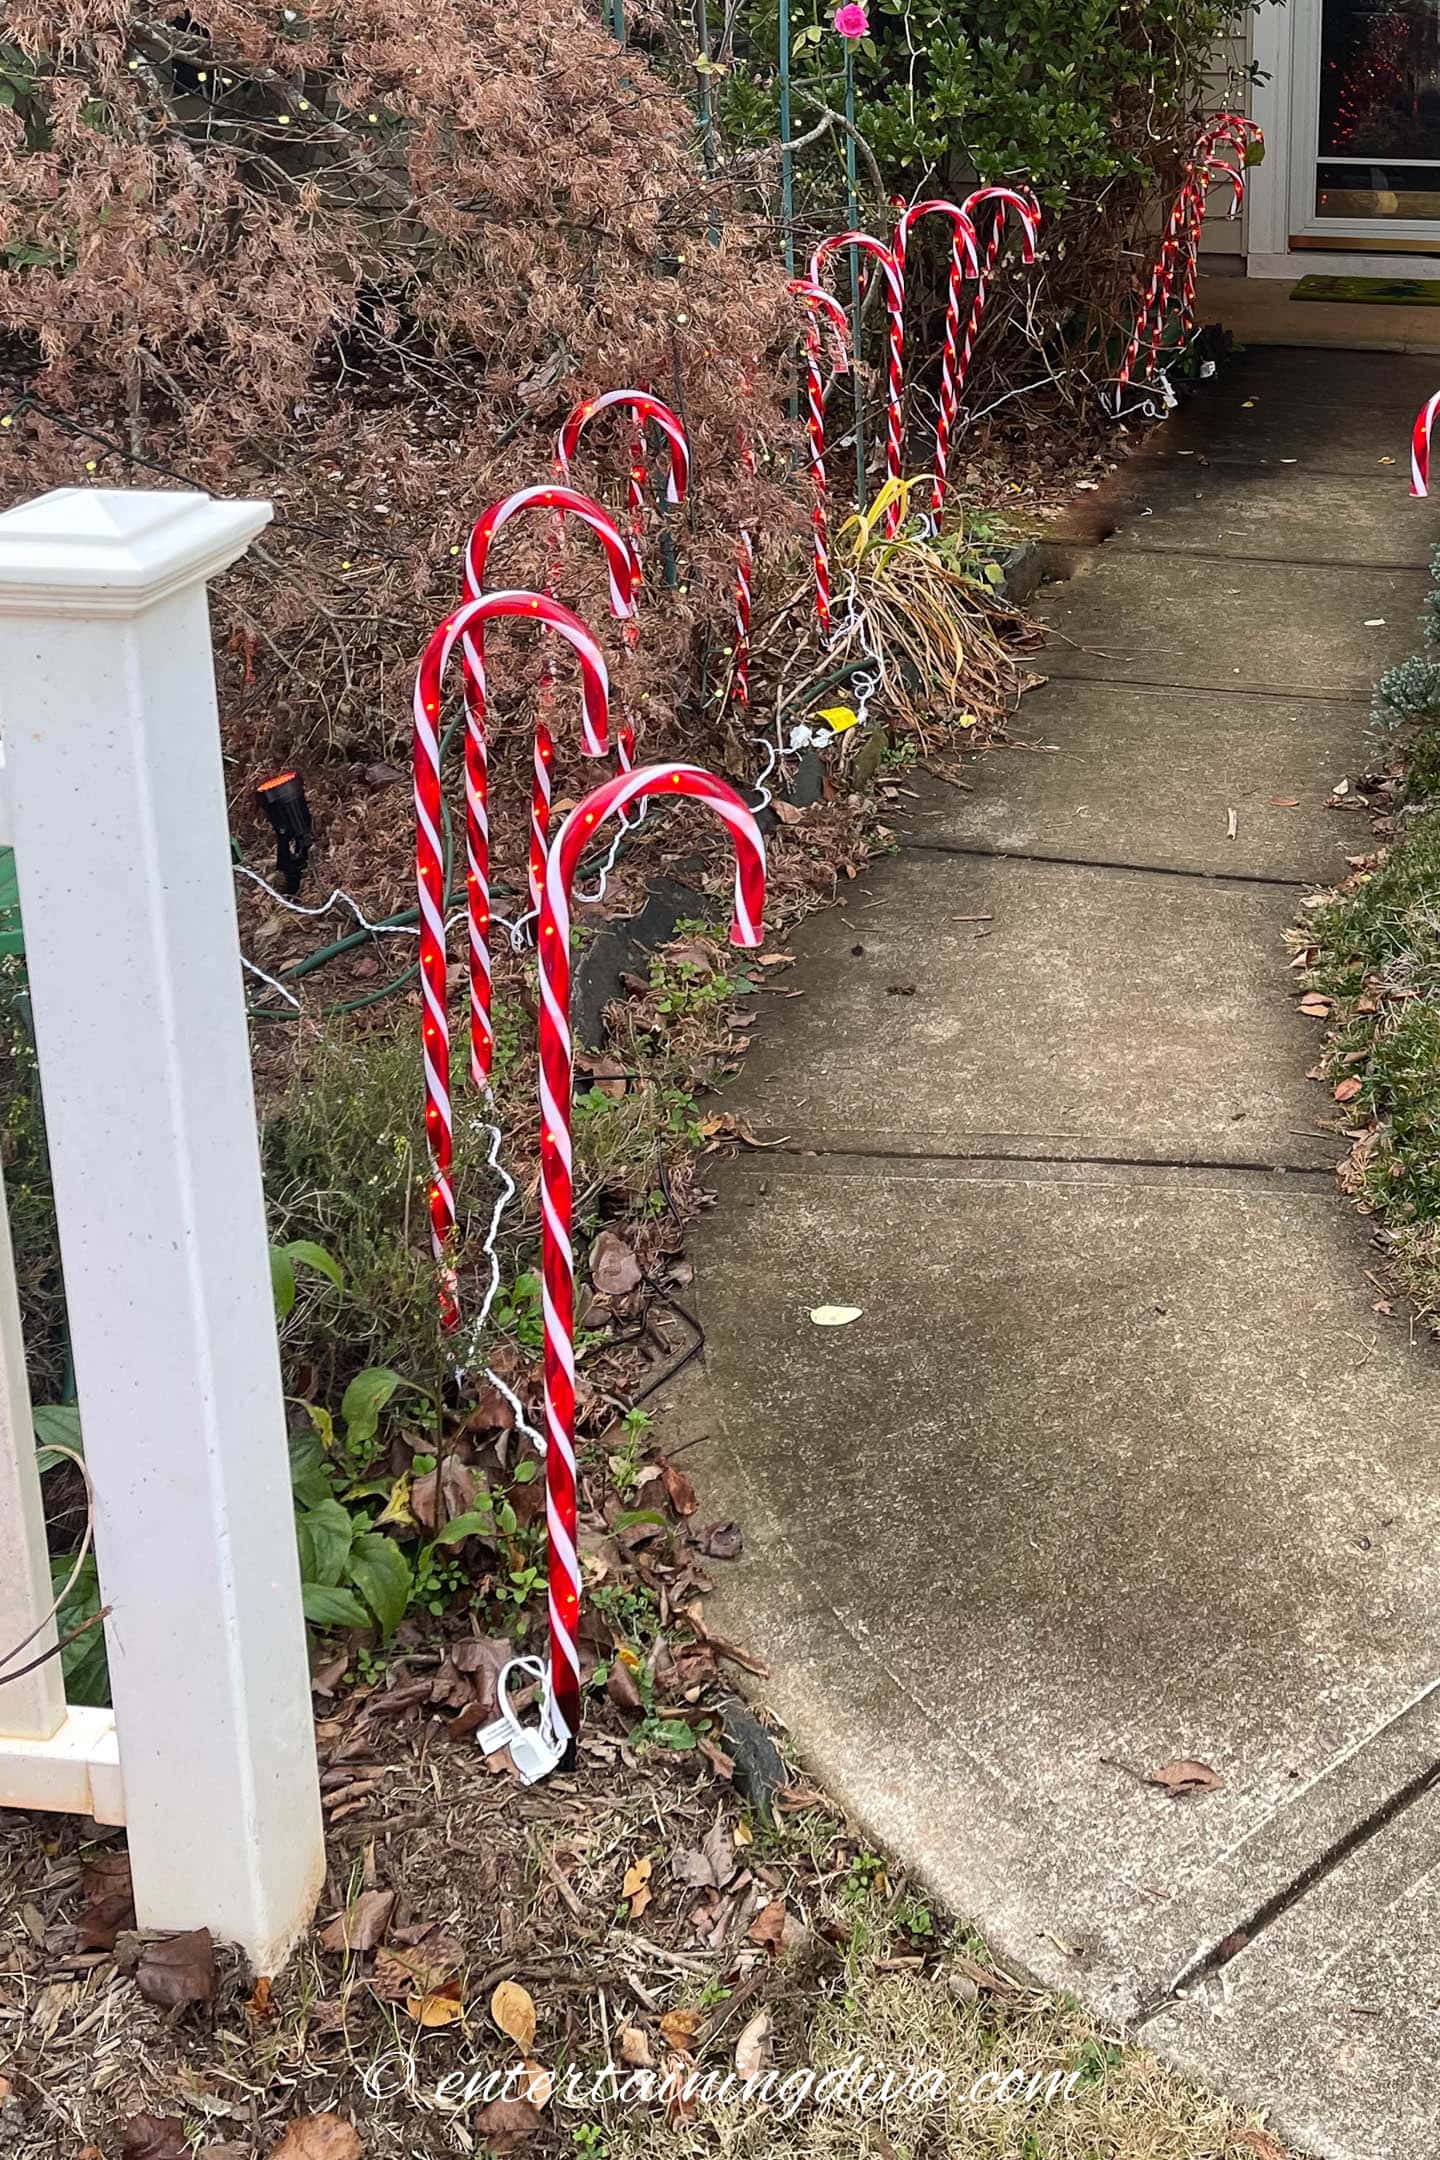 candy cane path lights along the front sidewalk